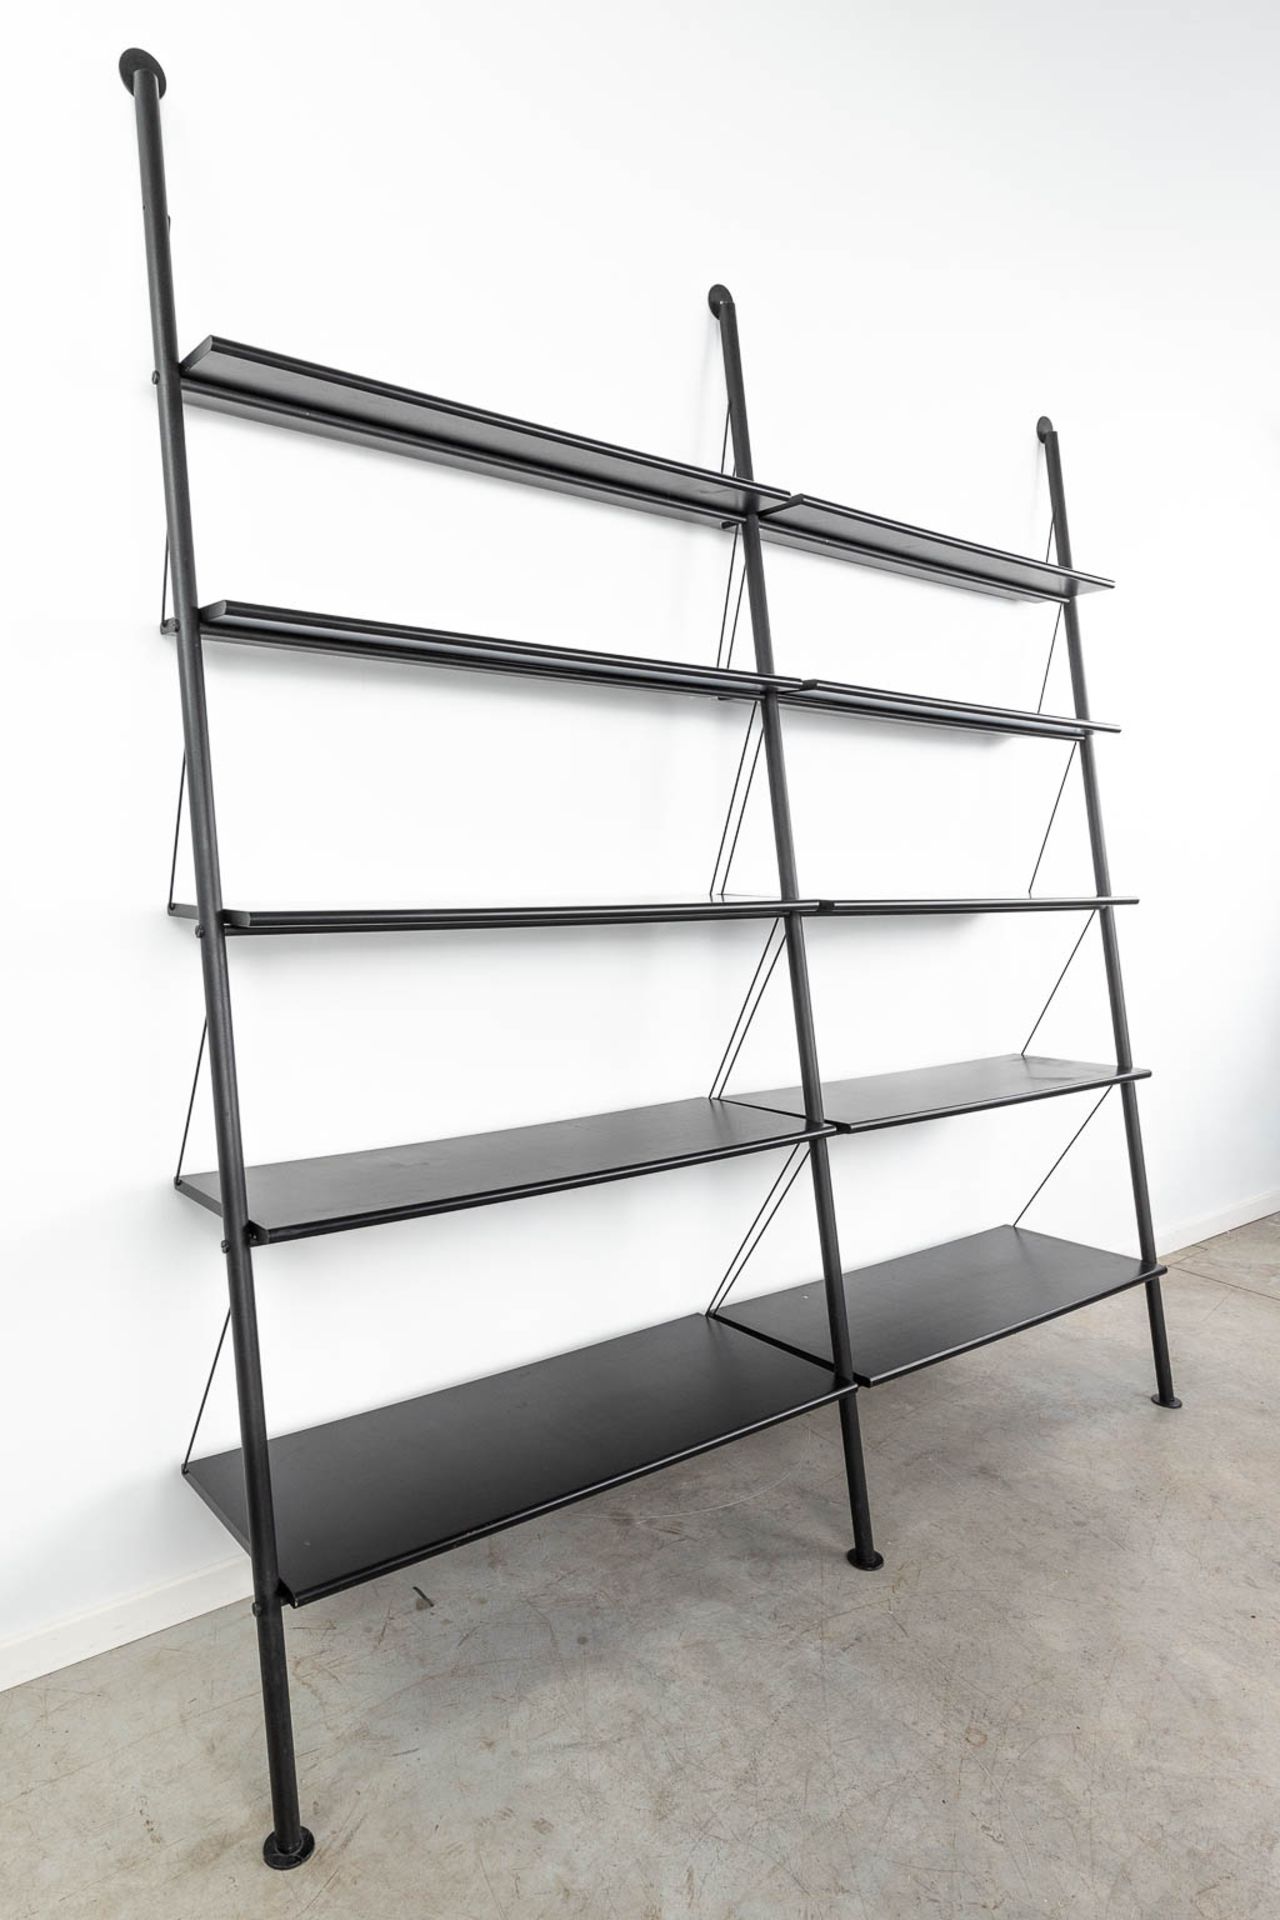 Philippe STARCK (1949) 'John LLD' two wall units, metal and wood. (D:50 x W:110 x H:218 cm) - Image 4 of 16